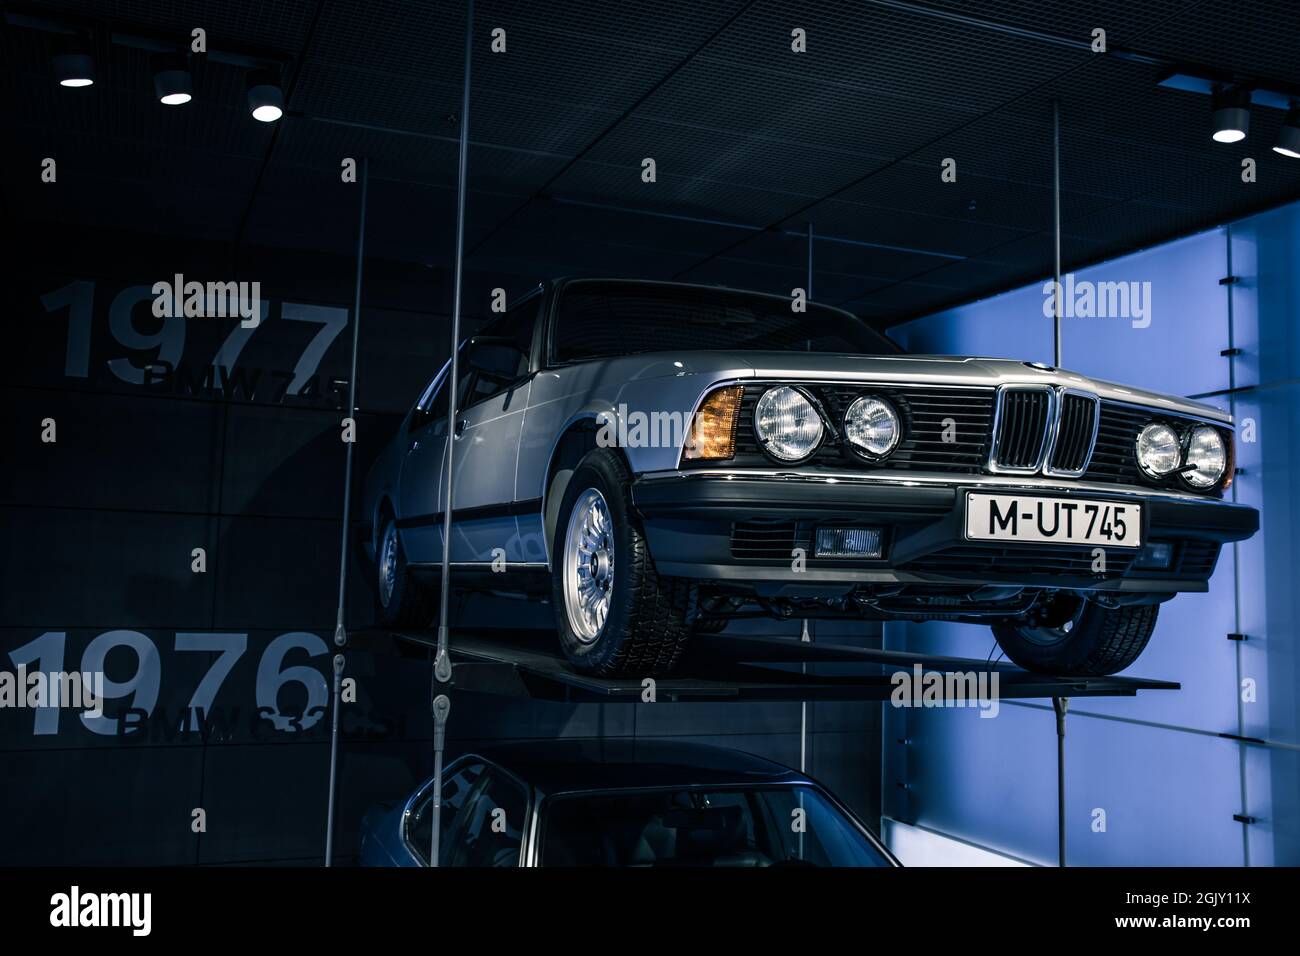 Munich/ Germany - May, 24 2019: 1977 BMW 745iclassic car in BMW Museum/ BMW Welt Stock Photo